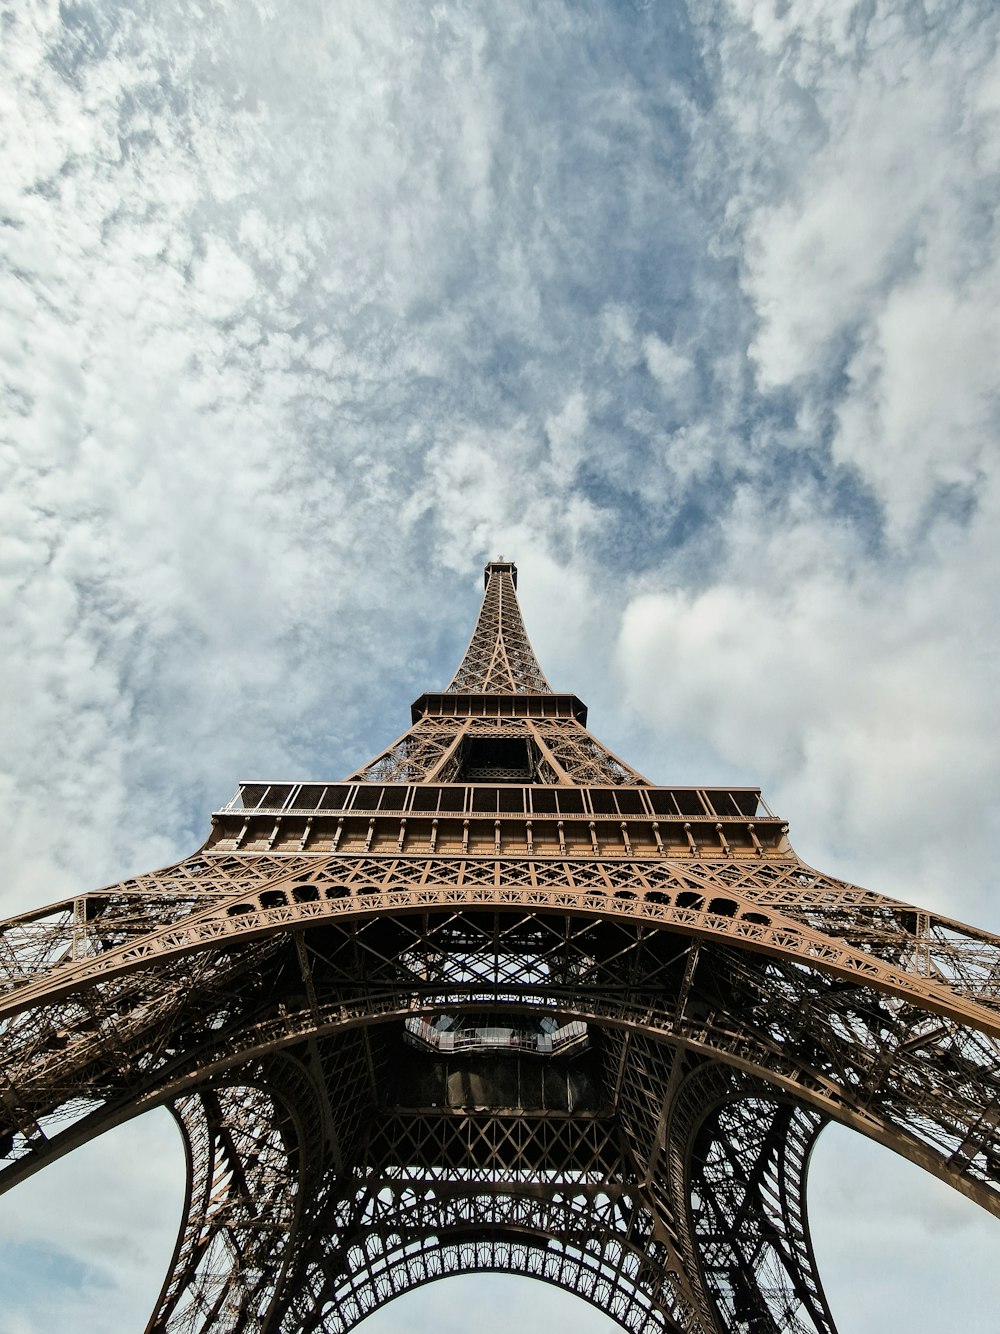 the top of the eiffel tower under a cloudy sky